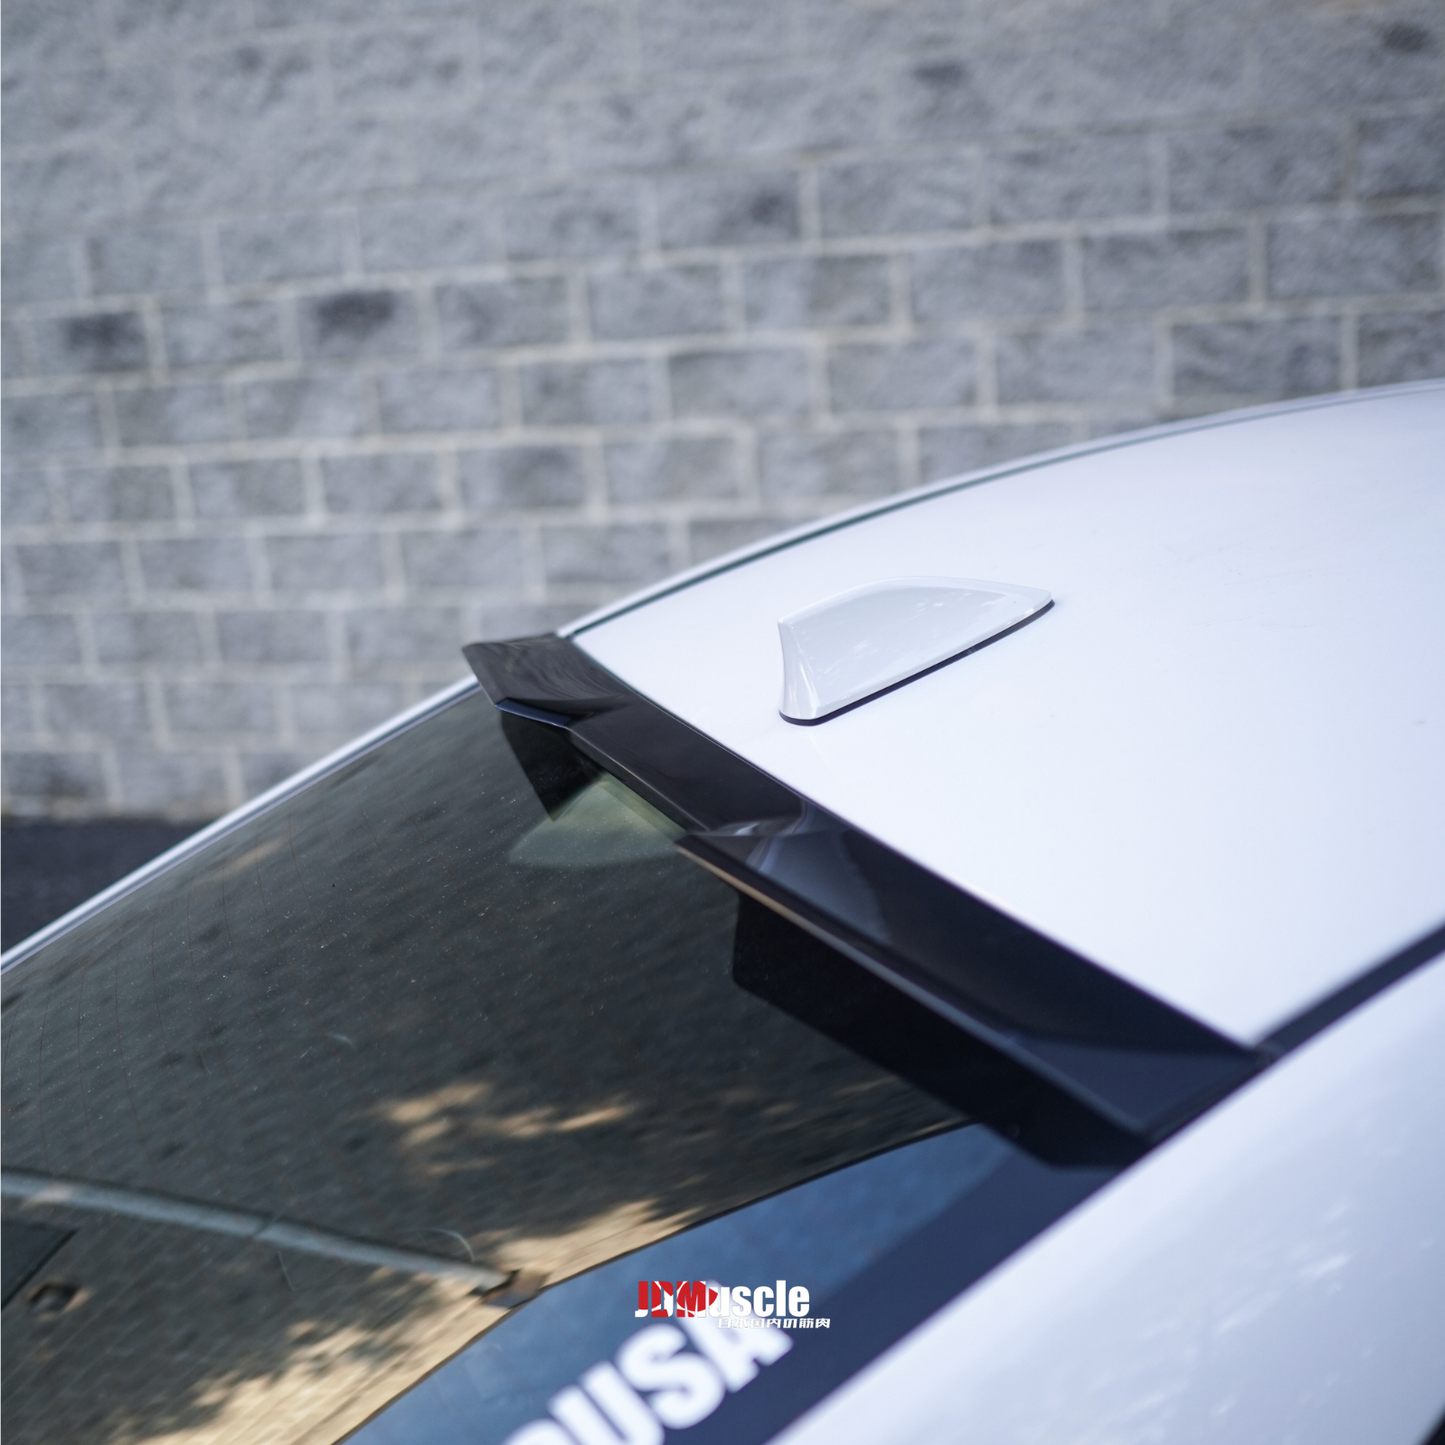 JDMuscle 22-24 WRX Roof Spoiler V1 - Paint Matched / Gloss Black / ABS